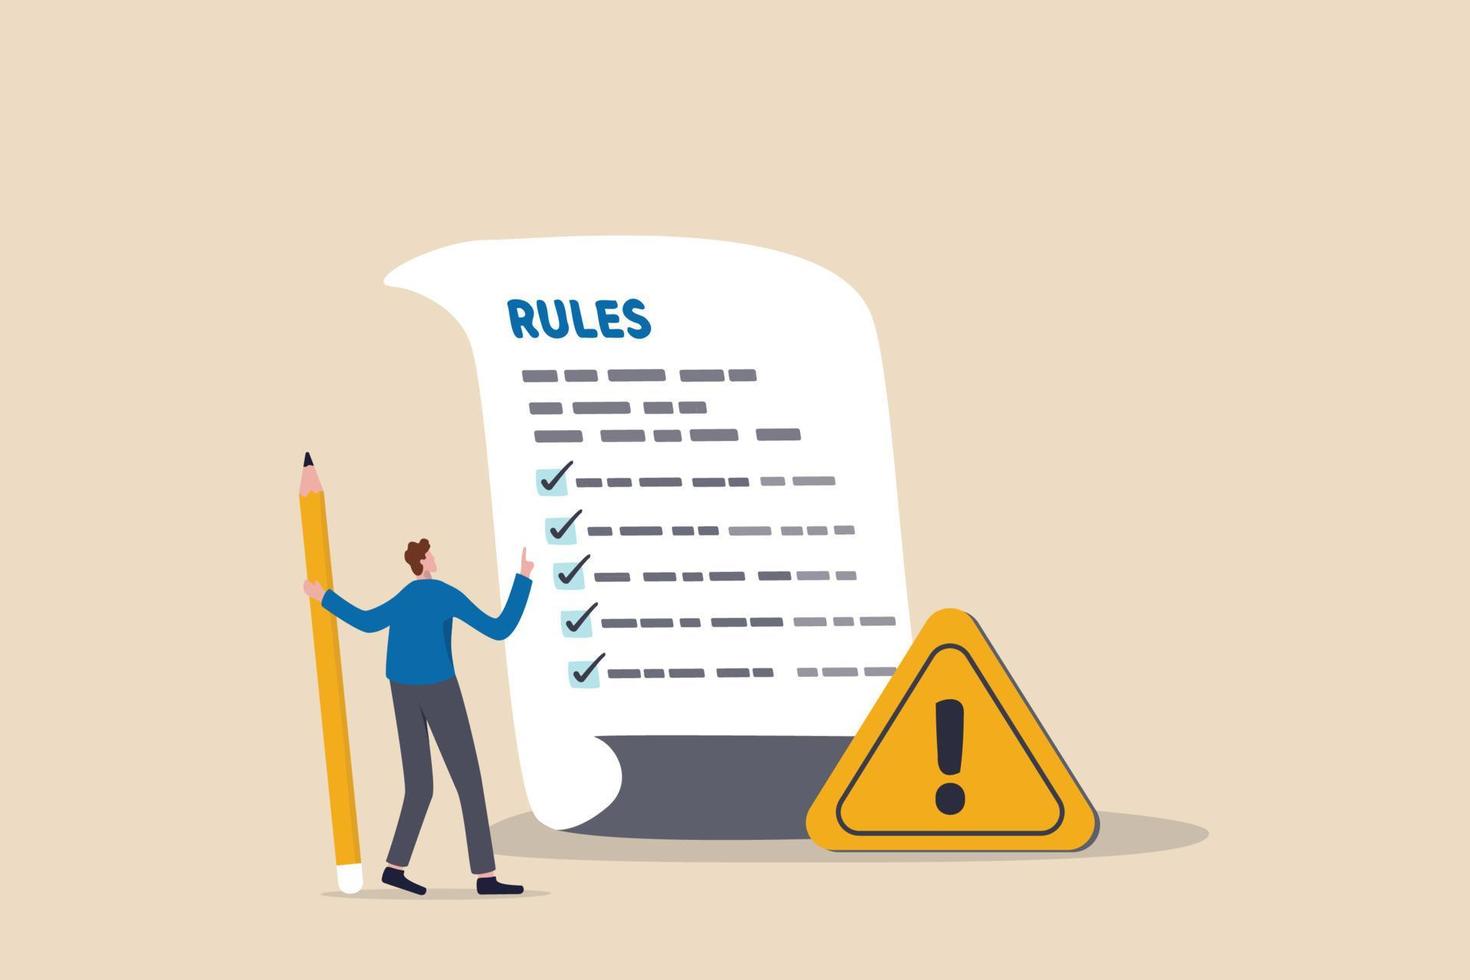 Rules and regulations, policy and guideline for employee to follow, legal term, corporate compliance or laws, standard procedure concept, businessman finish writing rules and regulations document. vector